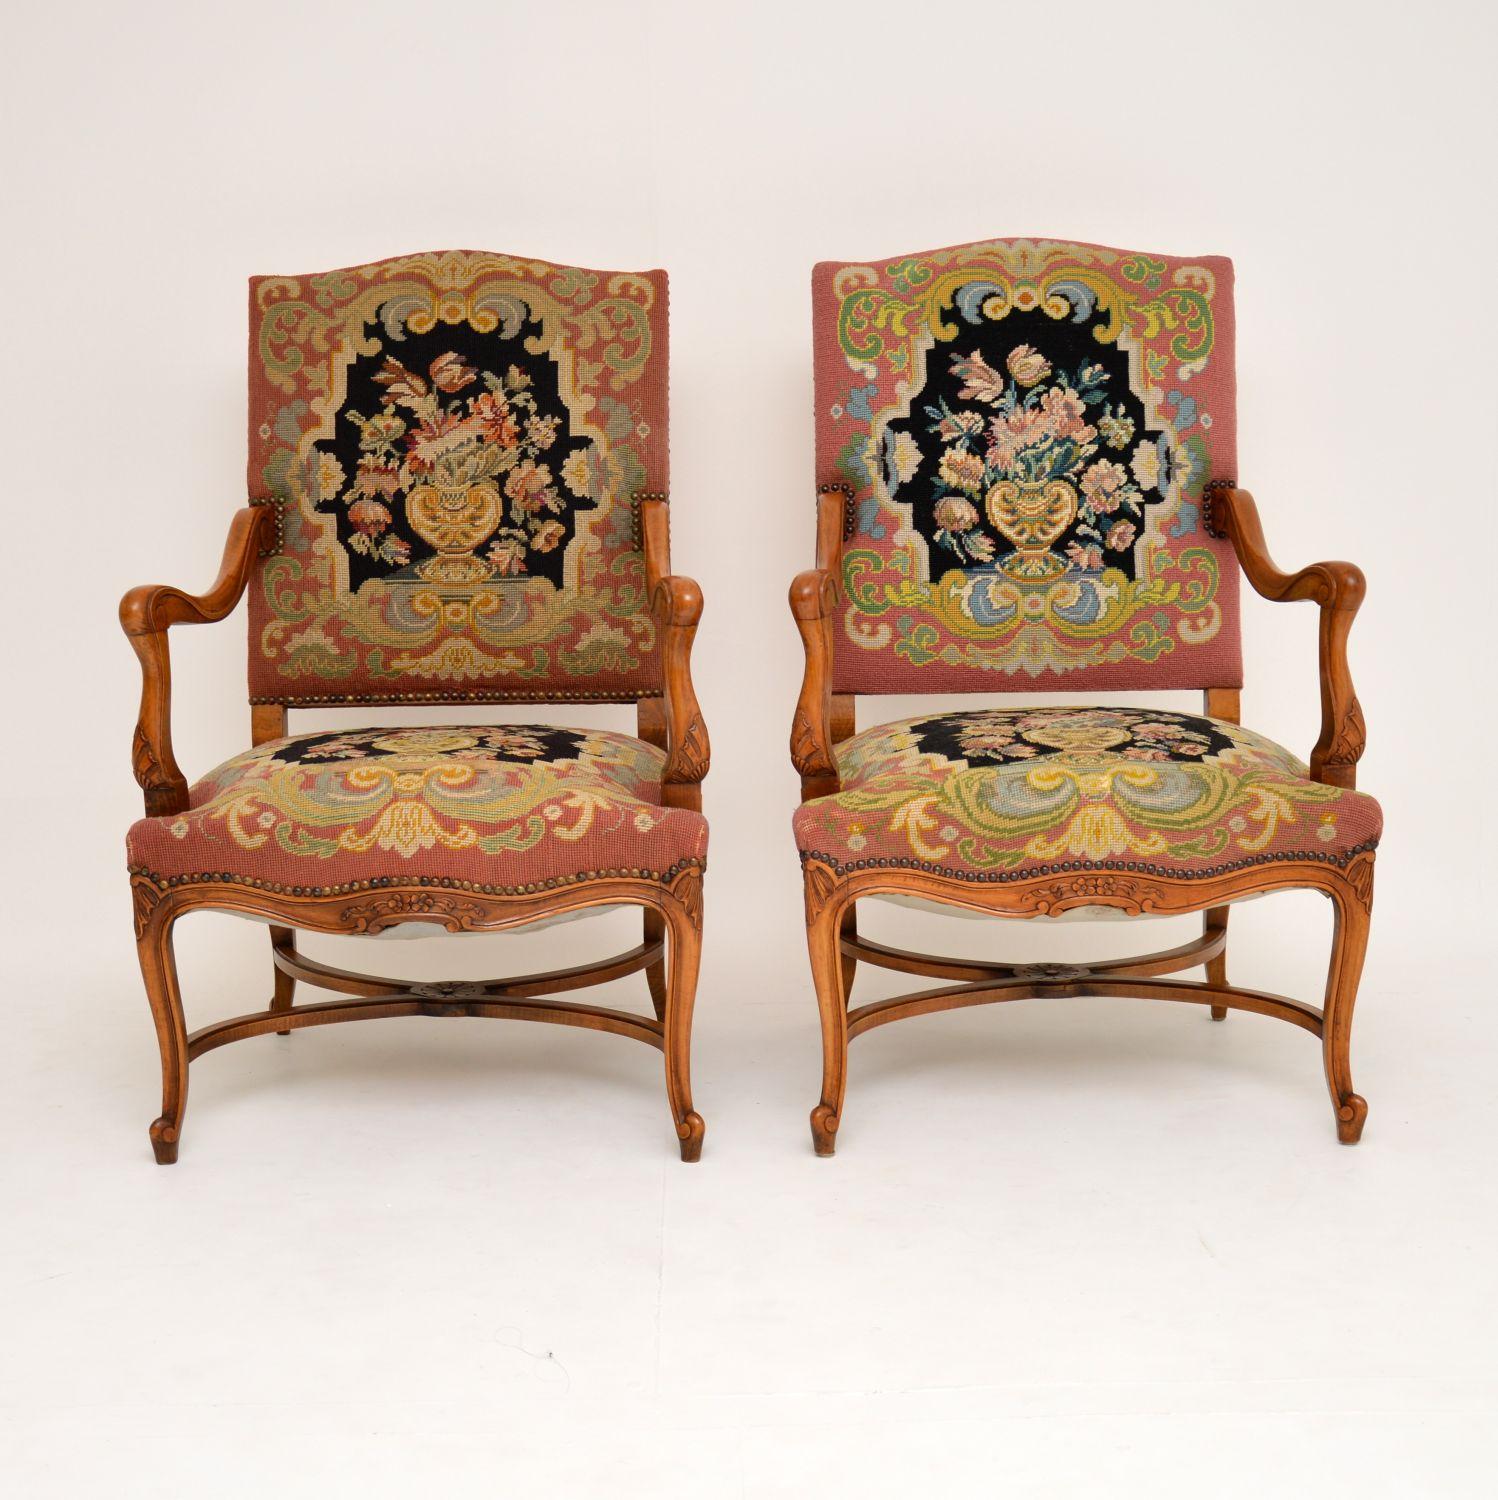 This pair of antique open armchairs have the original needlepoint fabric which is still in excellent condition and very colorful too. We just brought these over from Sweden, so presume they are Swedish, although there are brass engraved plaques on